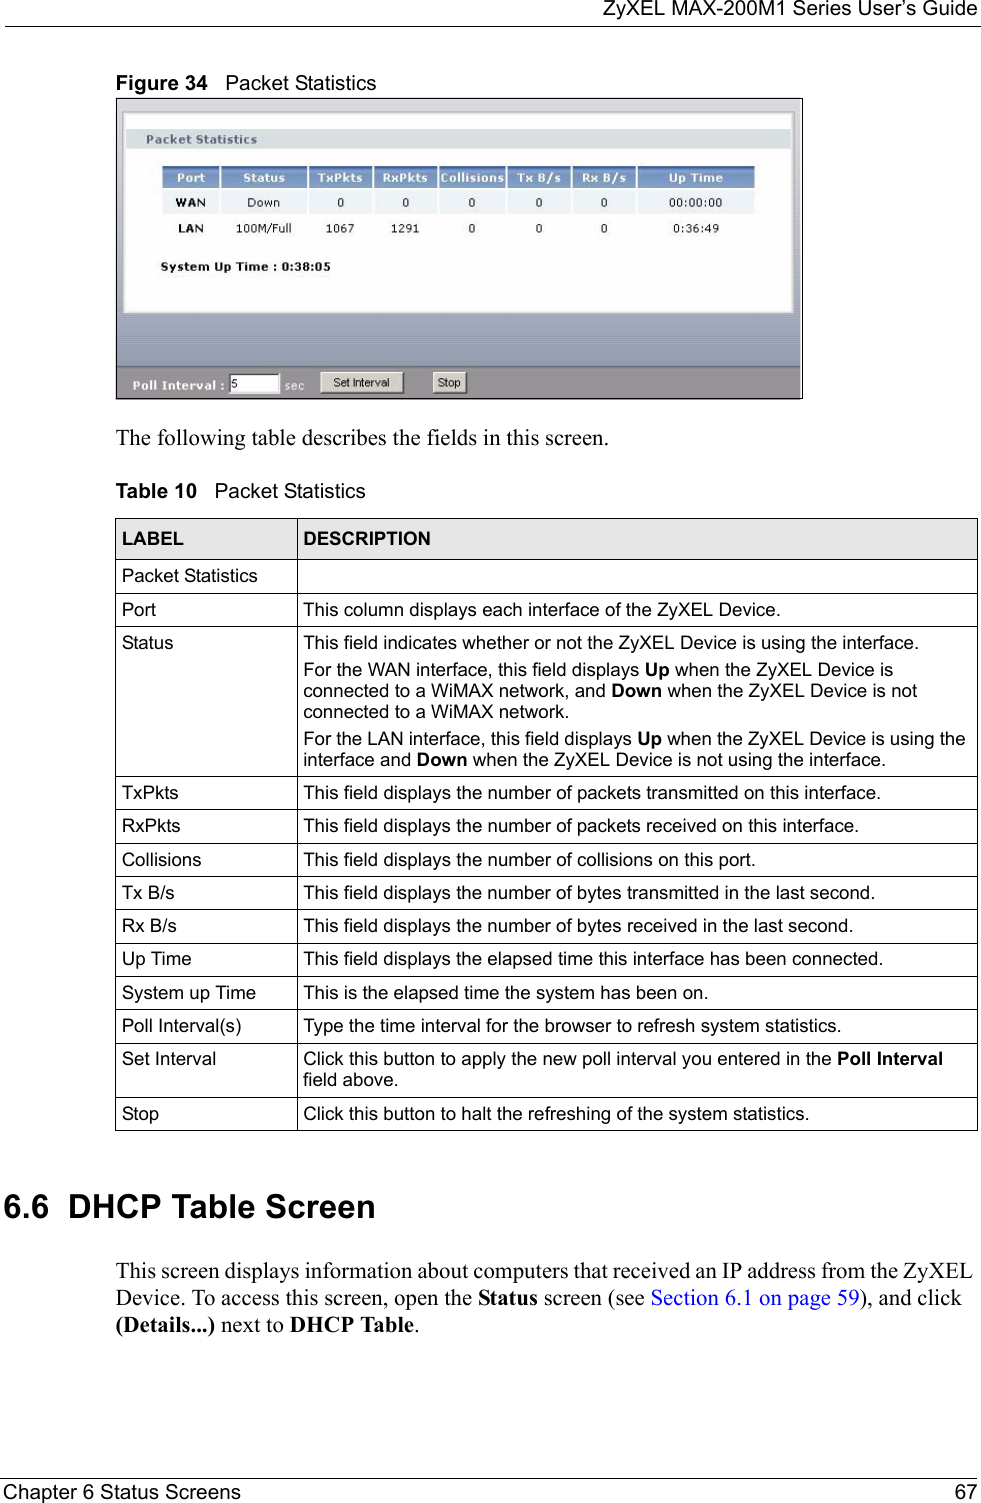 ZyXEL MAX-200M1 Series User’s GuideChapter 6 Status Screens 67Figure 34   Packet StatisticsThe following table describes the fields in this screen.  6.6  DHCP Table ScreenThis screen displays information about computers that received an IP address from the ZyXEL Device. To access this screen, open the Status screen (see Section 6.1 on page 59), and click (Details...) next to DHCP Table.Table 10   Packet StatisticsLABEL DESCRIPTIONPacket StatisticsPort This column displays each interface of the ZyXEL Device.Status  This field indicates whether or not the ZyXEL Device is using the interface.For the WAN interface, this field displays Up when the ZyXEL Device is connected to a WiMAX network, and Down when the ZyXEL Device is not connected to a WiMAX network.For the LAN interface, this field displays Up when the ZyXEL Device is using the interface and Down when the ZyXEL Device is not using the interface.TxPkts  This field displays the number of packets transmitted on this interface.RxPkts  This field displays the number of packets received on this interface.Collisions This field displays the number of collisions on this port.Tx B/s  This field displays the number of bytes transmitted in the last second.Rx B/s This field displays the number of bytes received in the last second.Up Time  This field displays the elapsed time this interface has been connected. System up Time This is the elapsed time the system has been on.Poll Interval(s) Type the time interval for the browser to refresh system statistics.Set Interval Click this button to apply the new poll interval you entered in the Poll Interval field above.Stop Click this button to halt the refreshing of the system statistics.